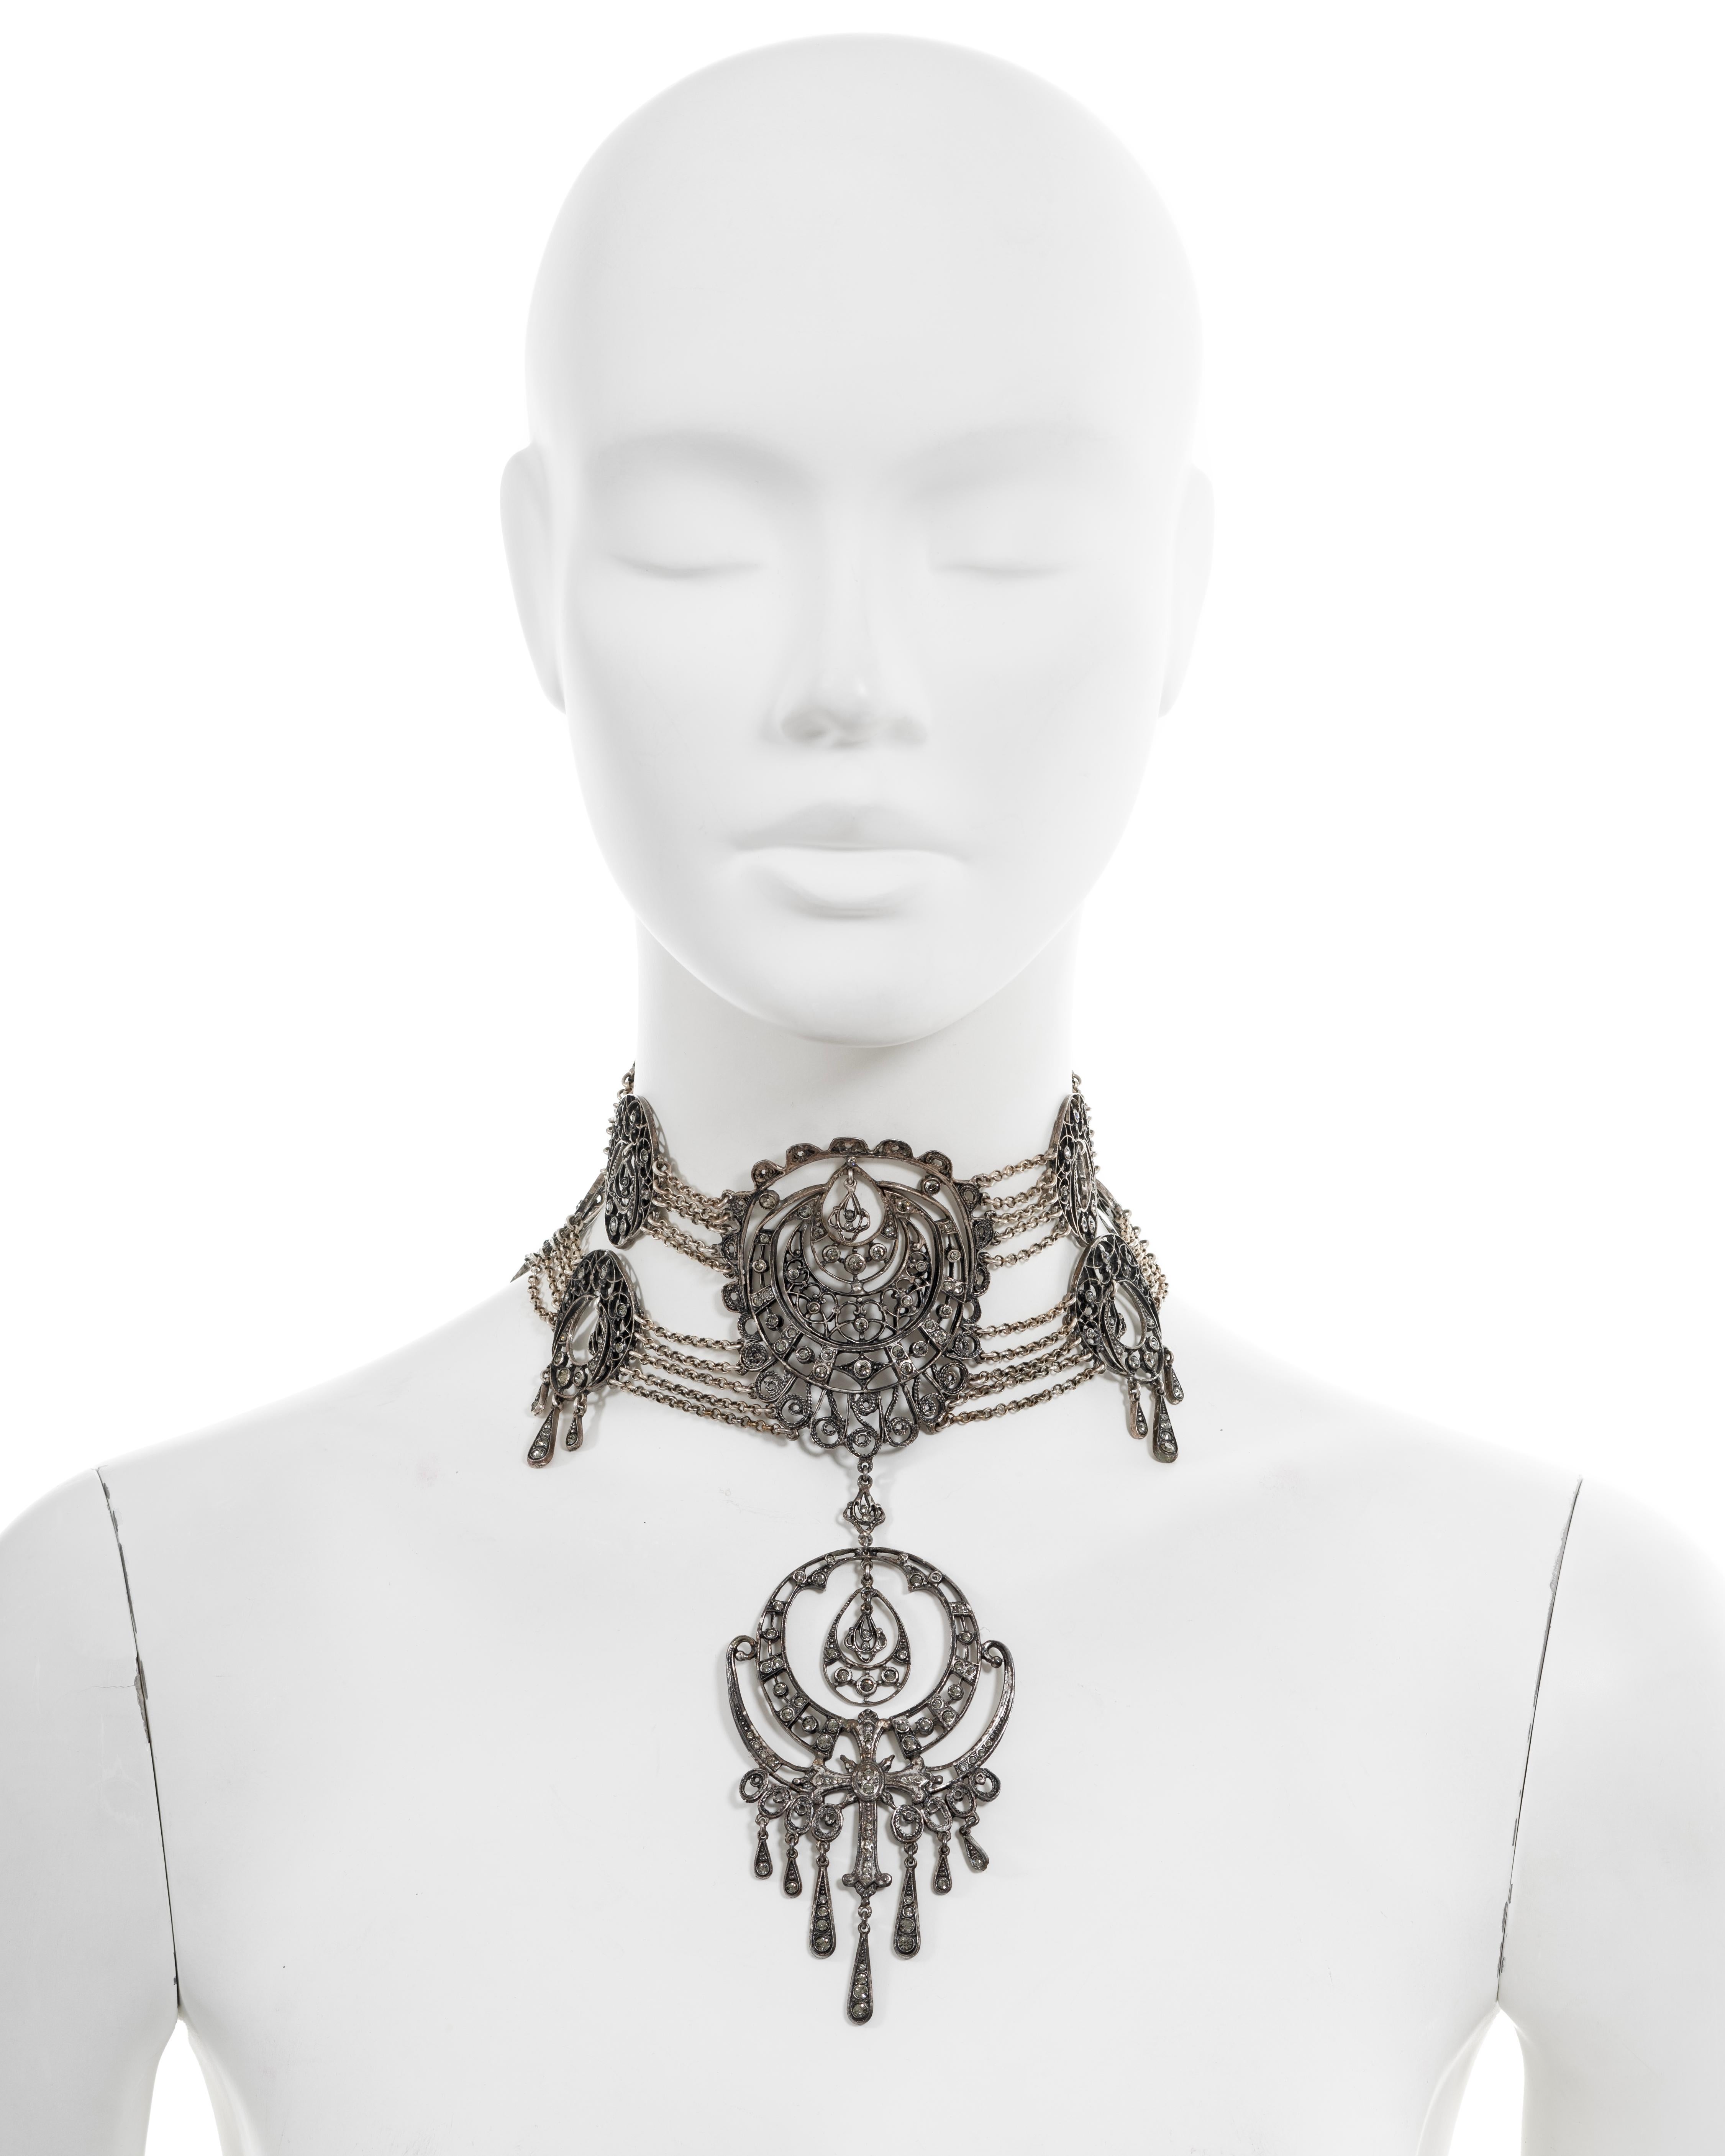 ▪ Archival Christian Dior choker necklace
▪ Creative Director: John Galliano
▪ Spring-Summer 1999
▪ Sold by One of a Kind Archive 

This rare Christian Dior choker necklace features a captivating design crafted from antique-style filigree pendants